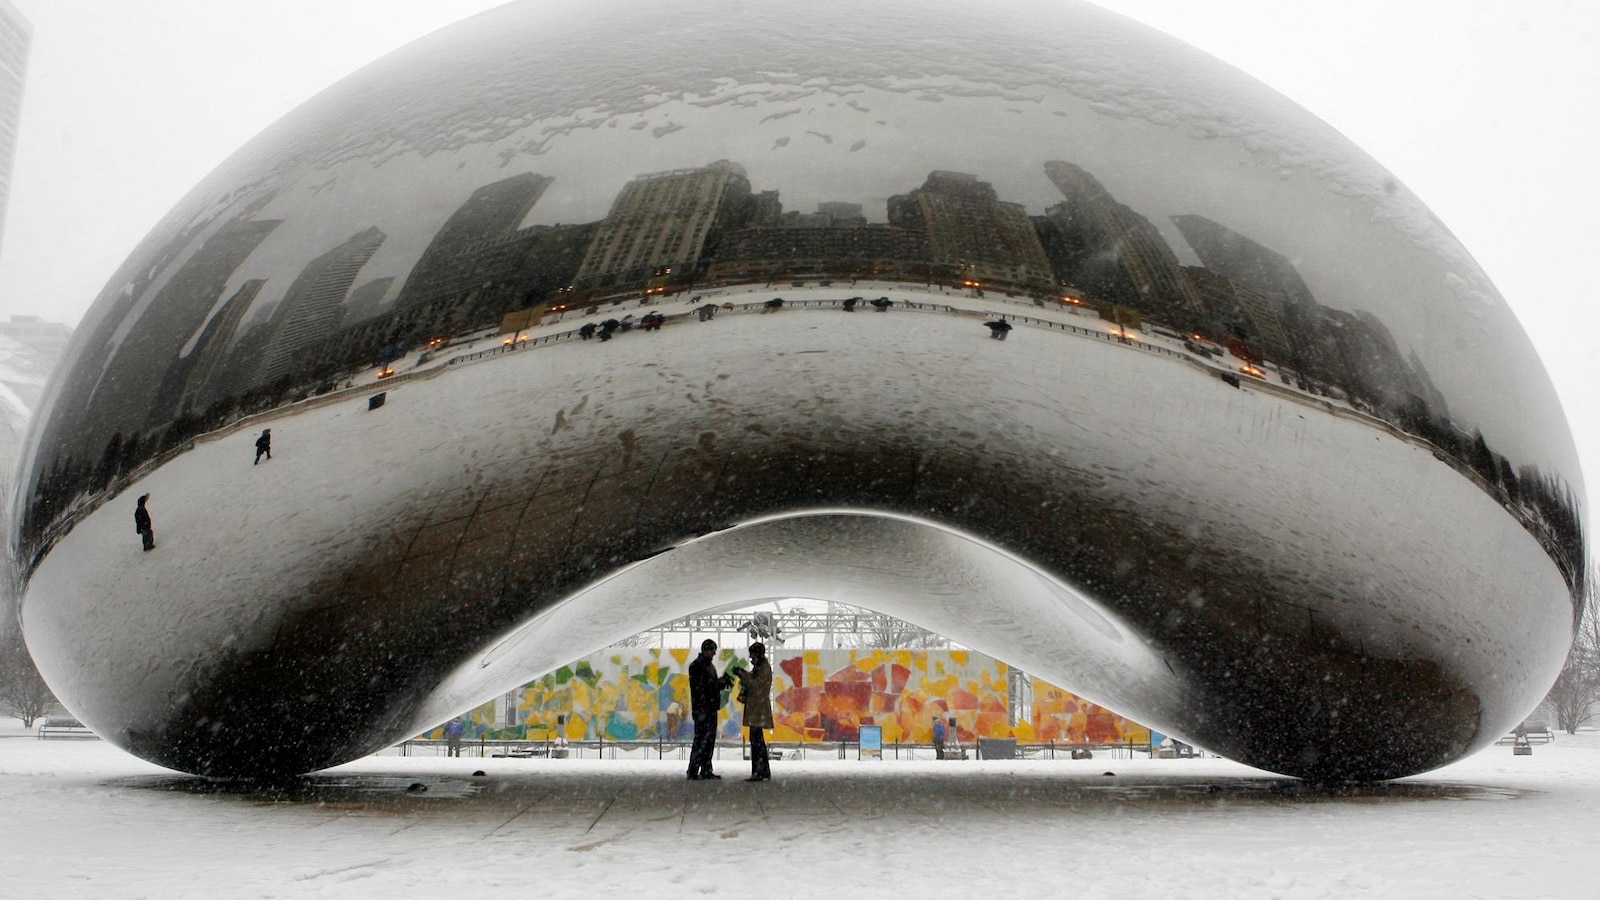 The 'Bean' sculpture in Chicago reopens to tourists after being closed for nearly a year